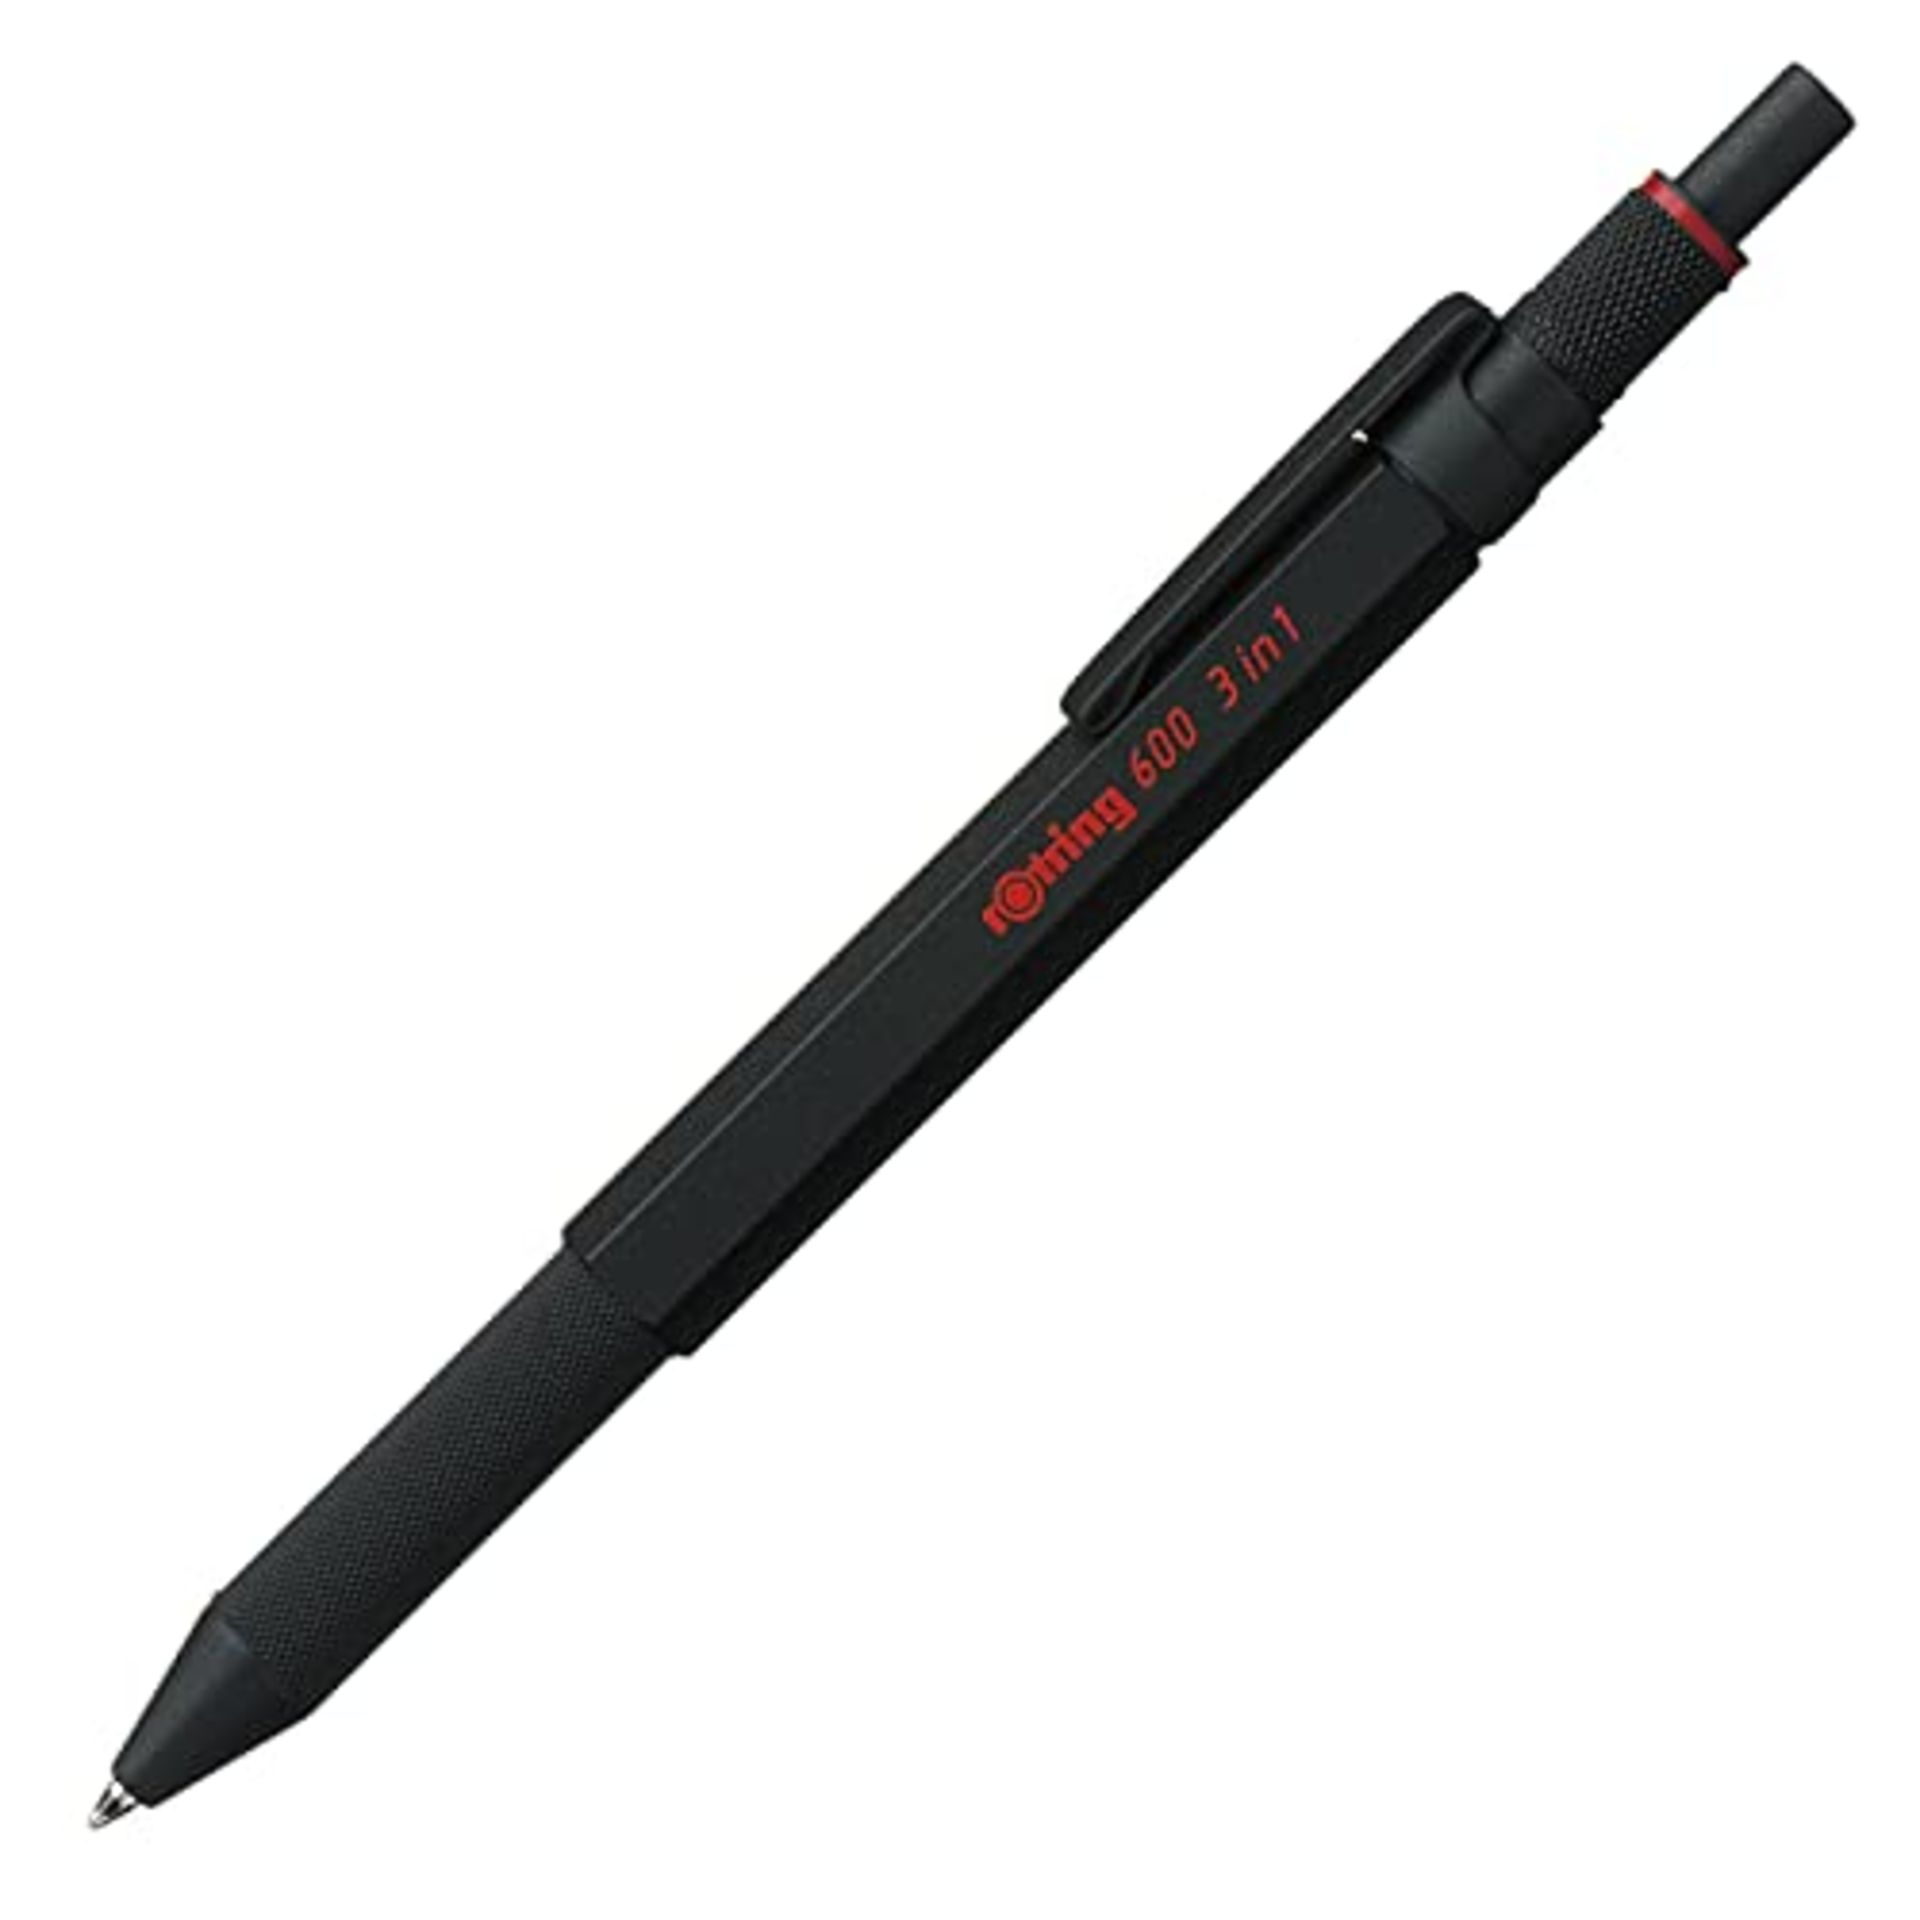 rOtring 600 Multi-colored pen and 3-in-1 mechanical pencil | 2 fine point ballpoint pe - Image 4 of 6